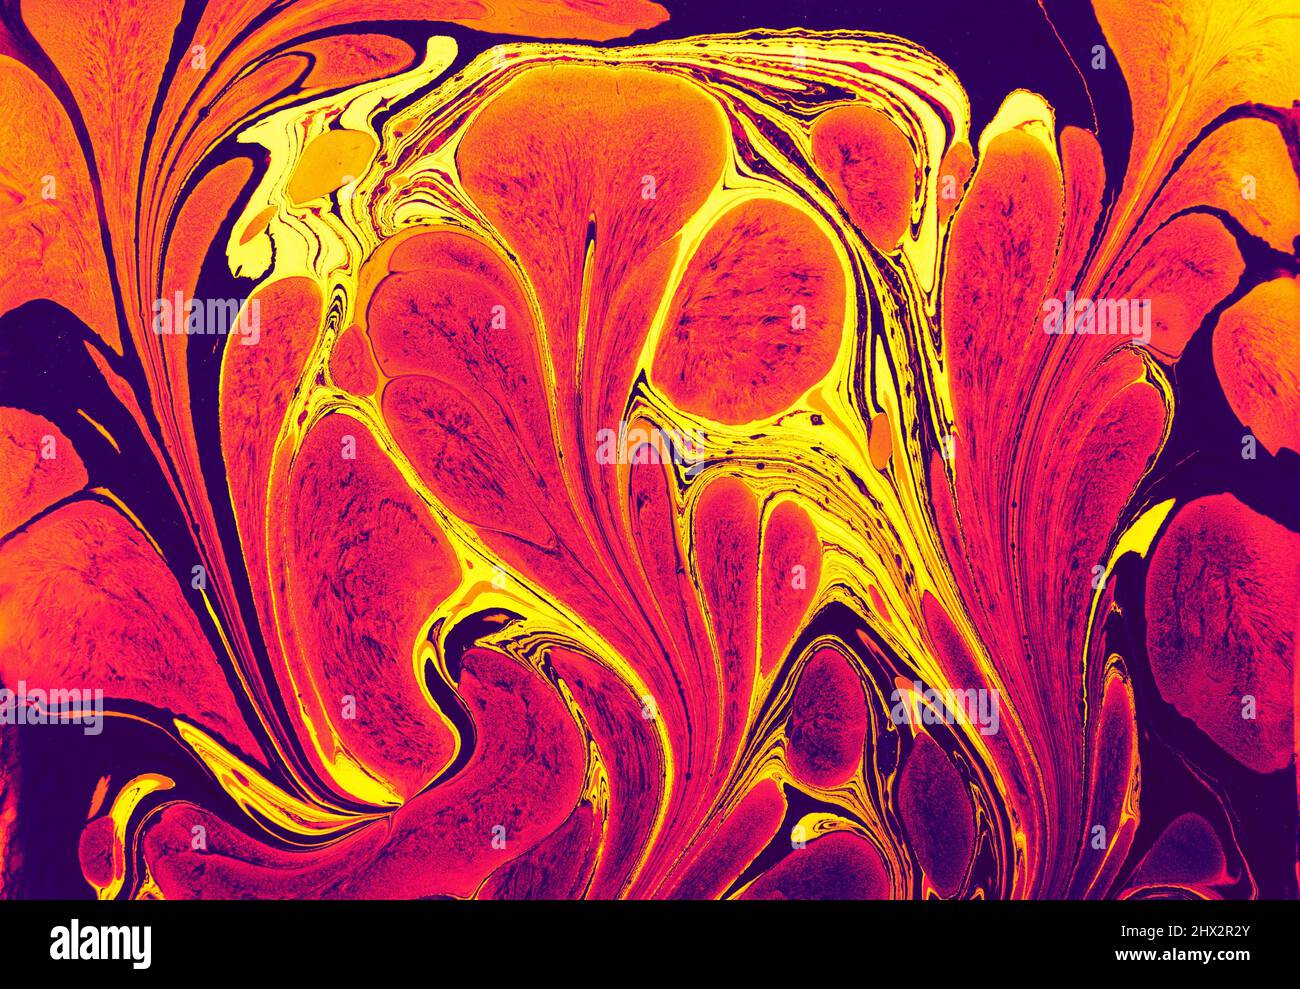 Abstract marbling floral pattern for fabric, tile design. background texture. Stock Photo